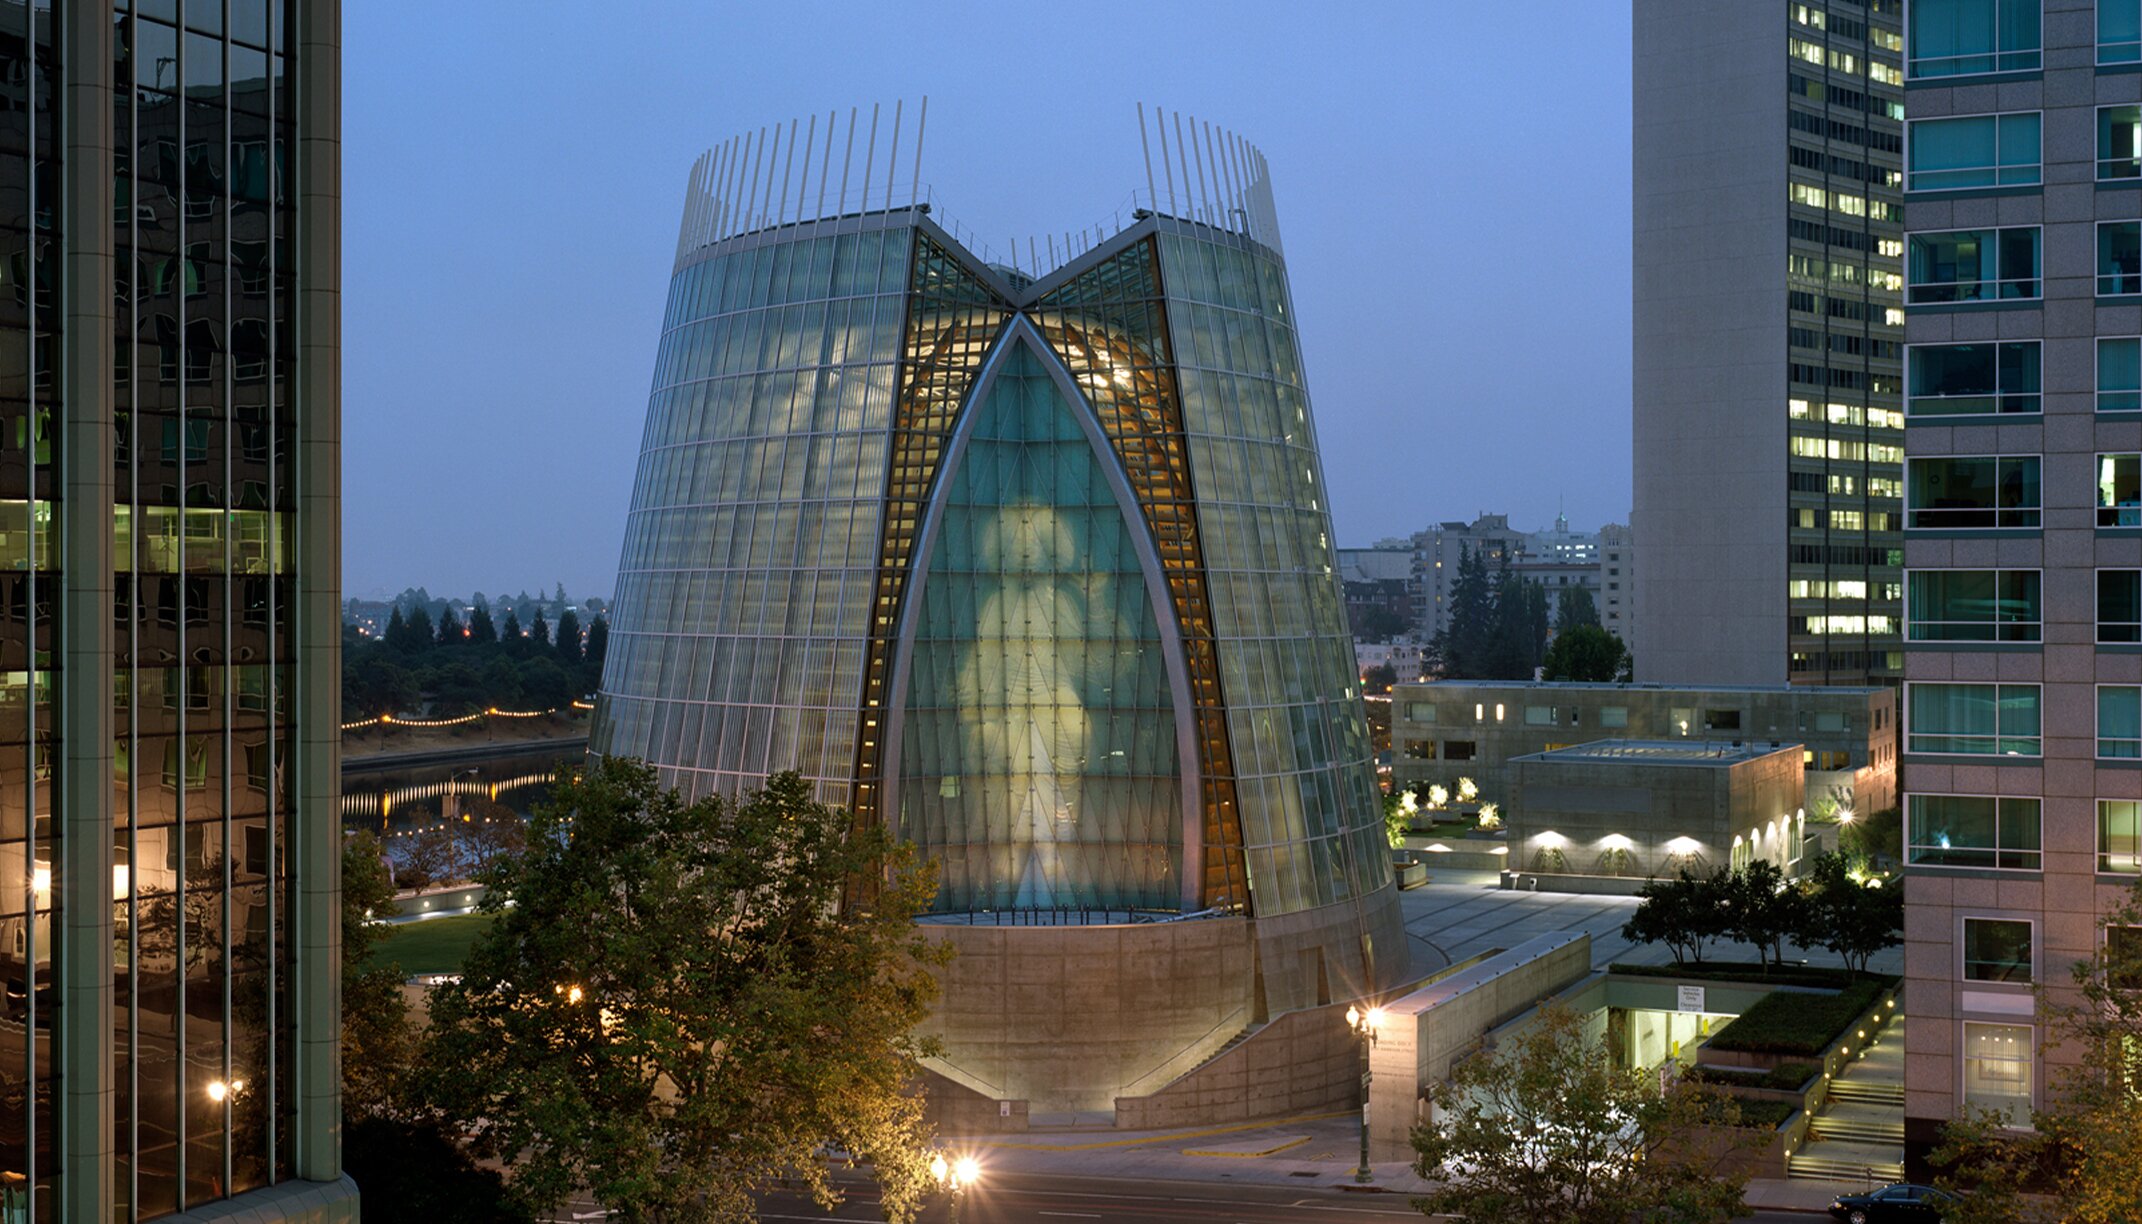 Detailview "Cathedral of Christ the Light"; illustrative aluminum panels | © Timothy Hursley